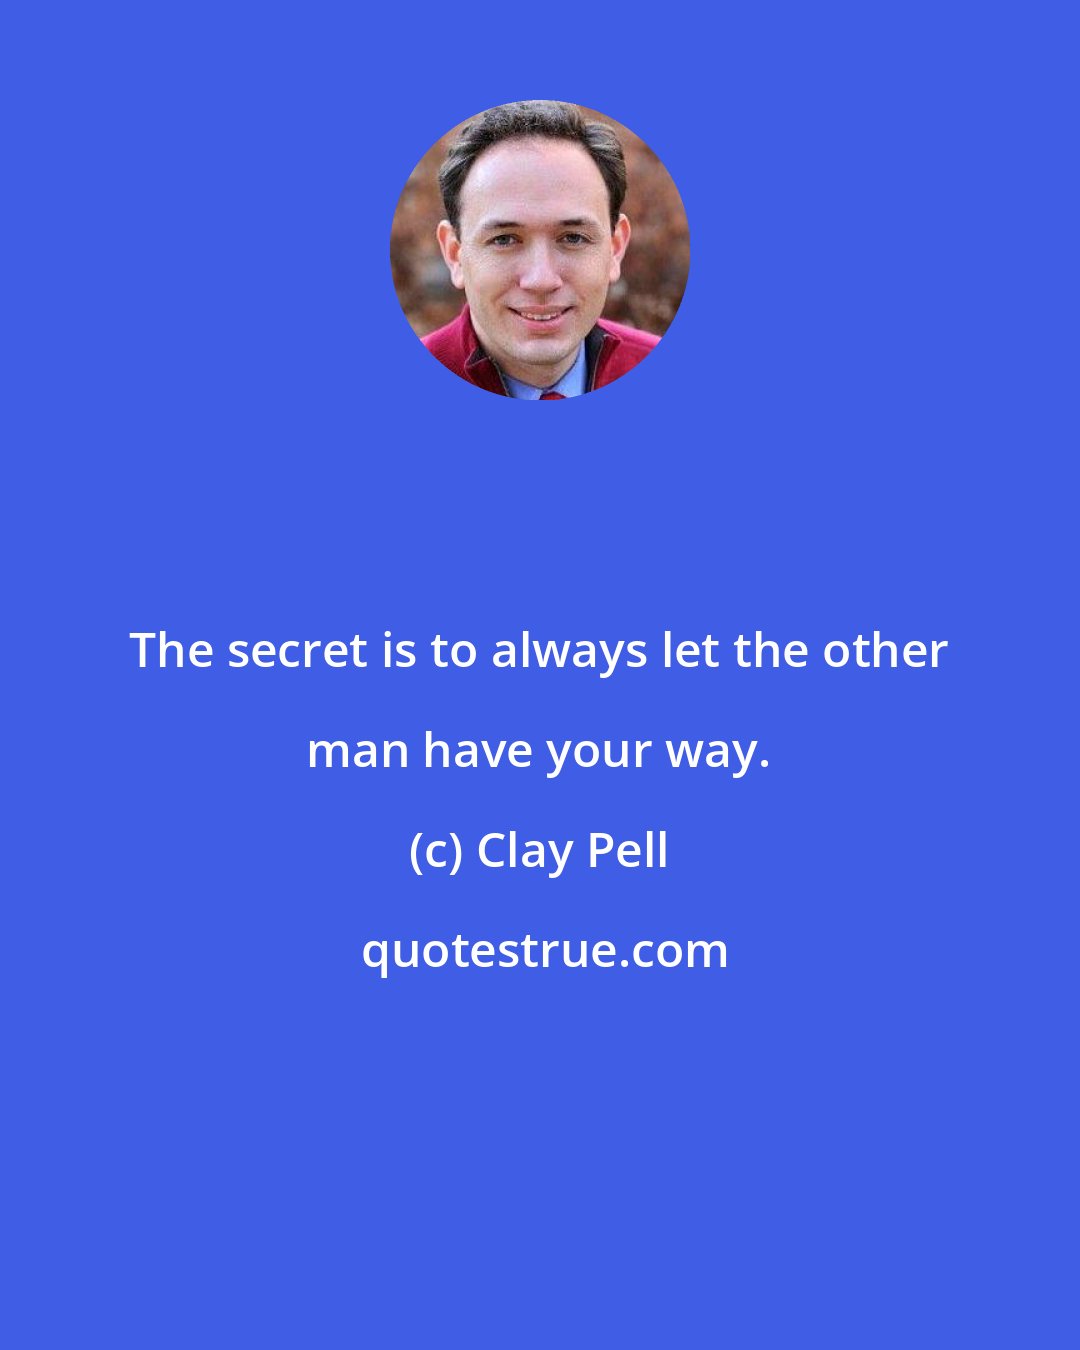 Clay Pell: The secret is to always let the other man have your way.